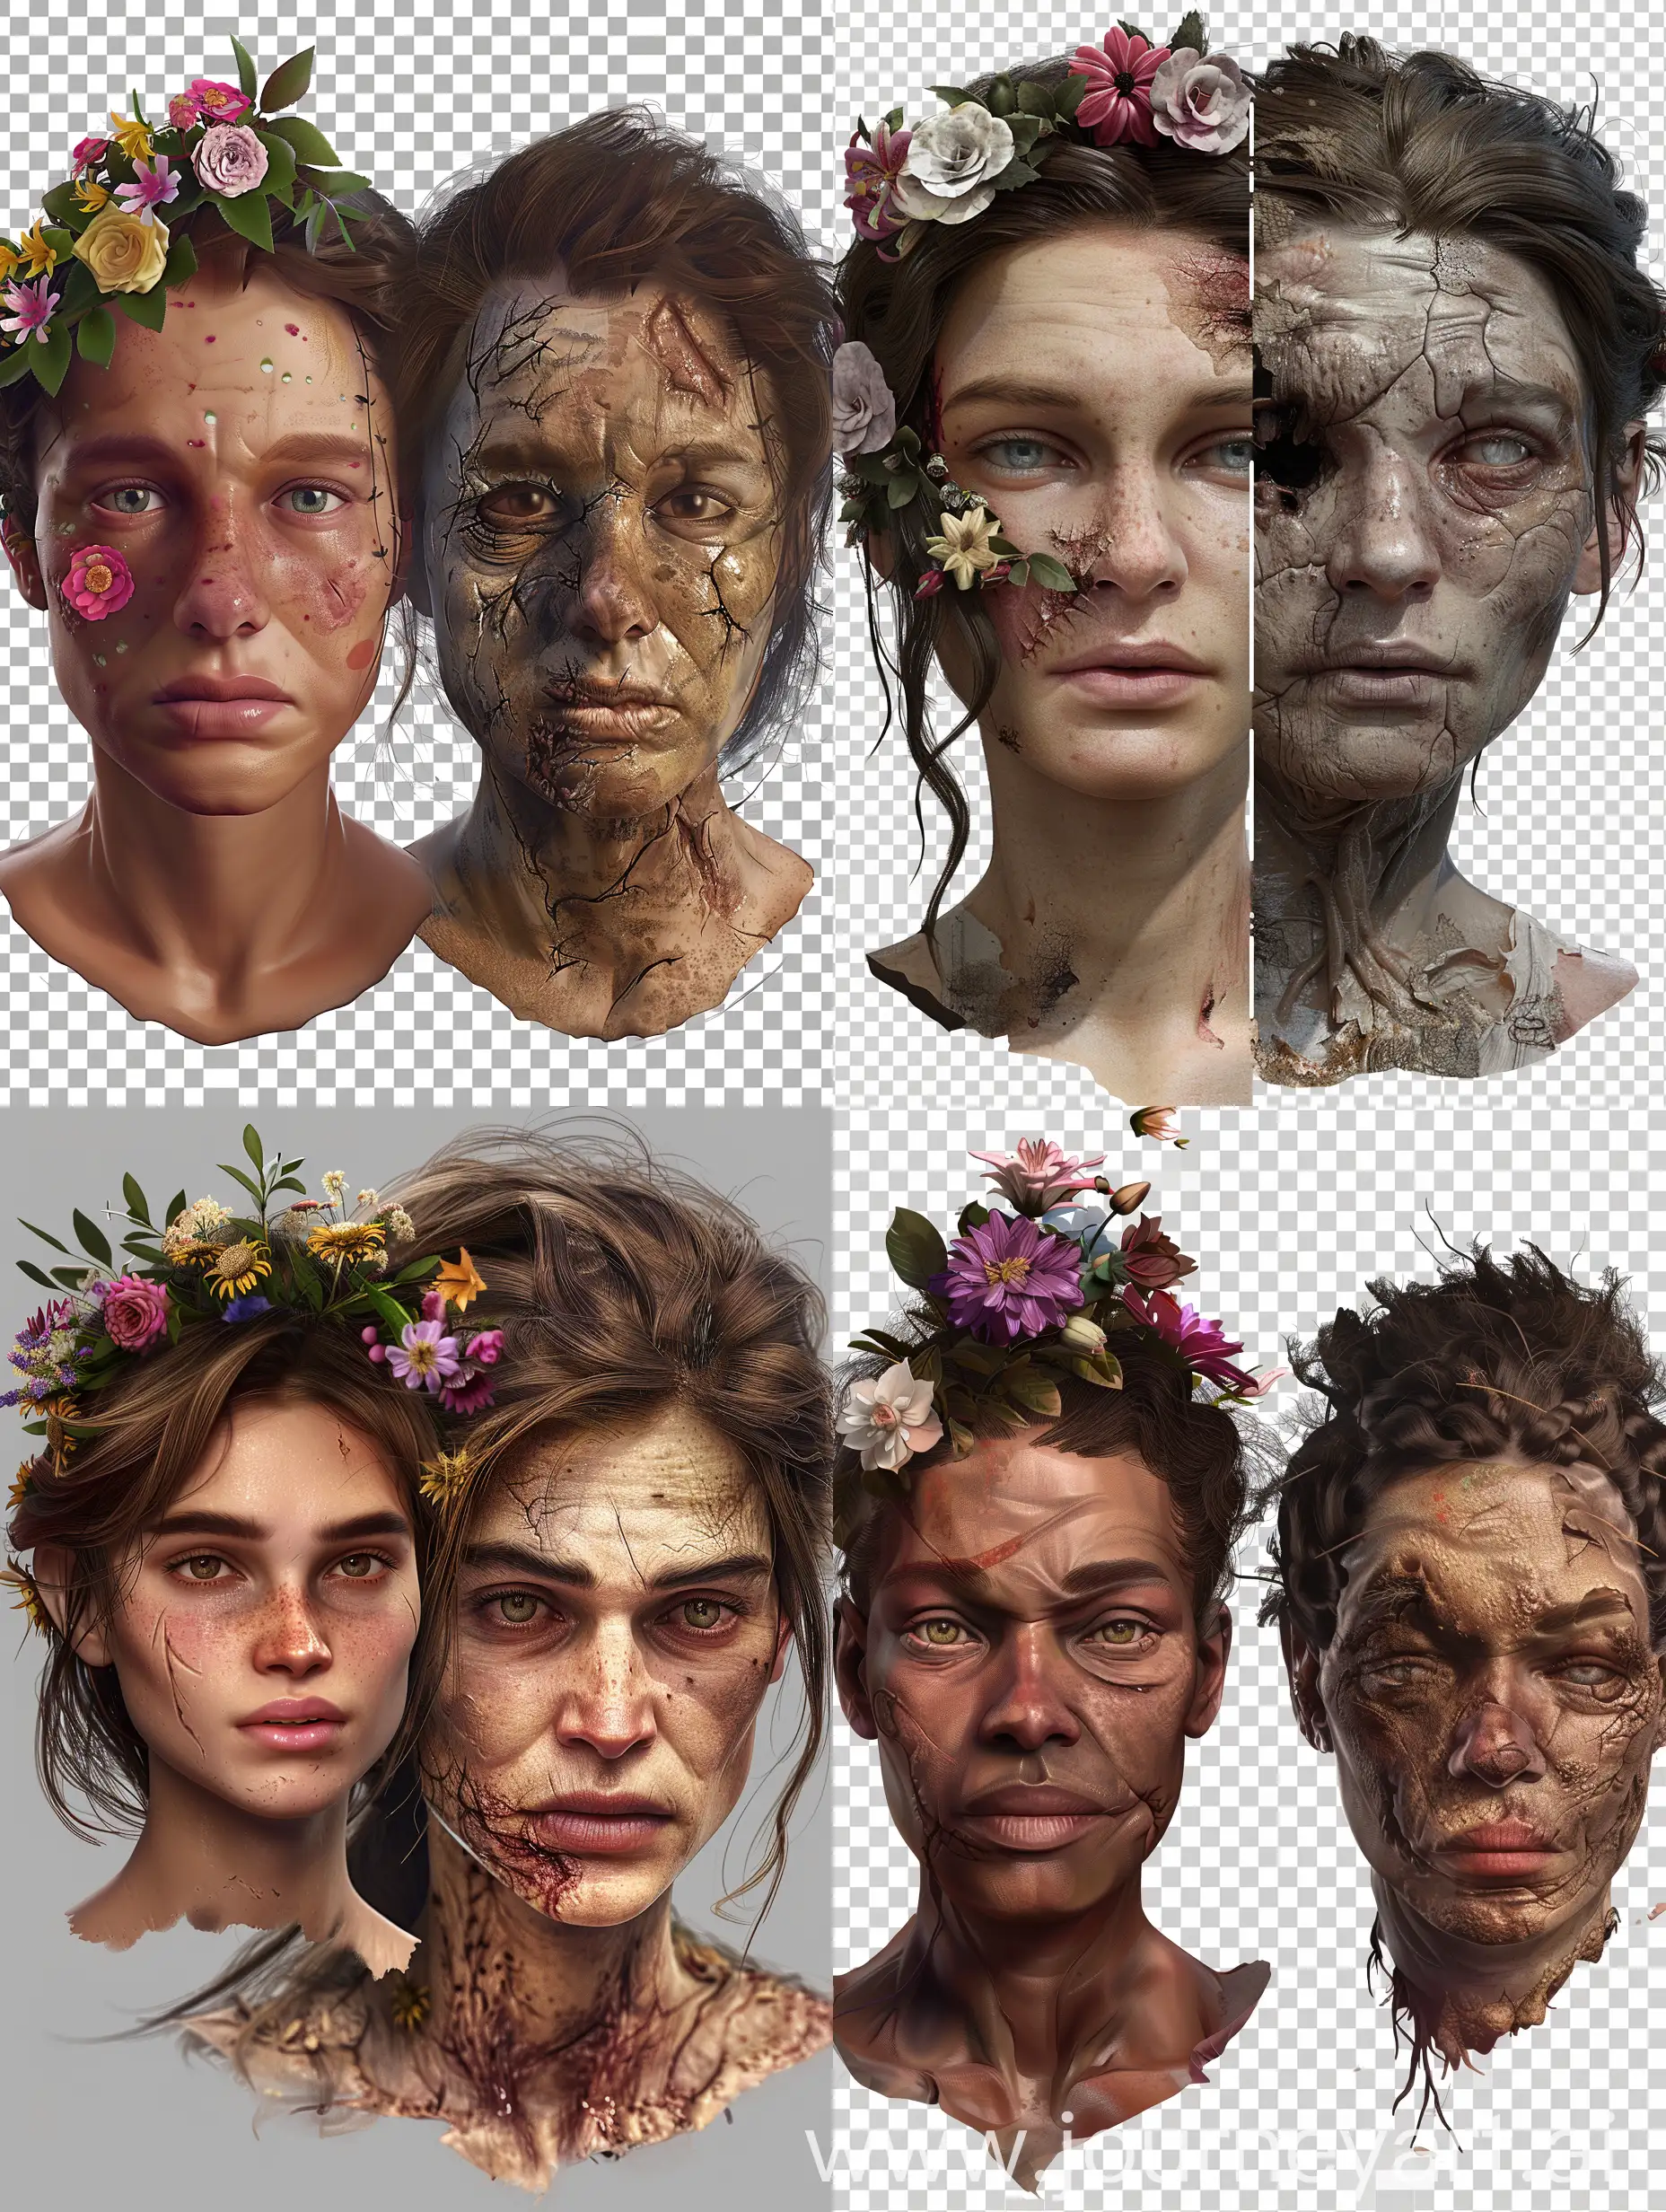 Contrasting-Emotions-Joyful-and-Weary-Faces-of-Women-with-Flowers-and-Scars